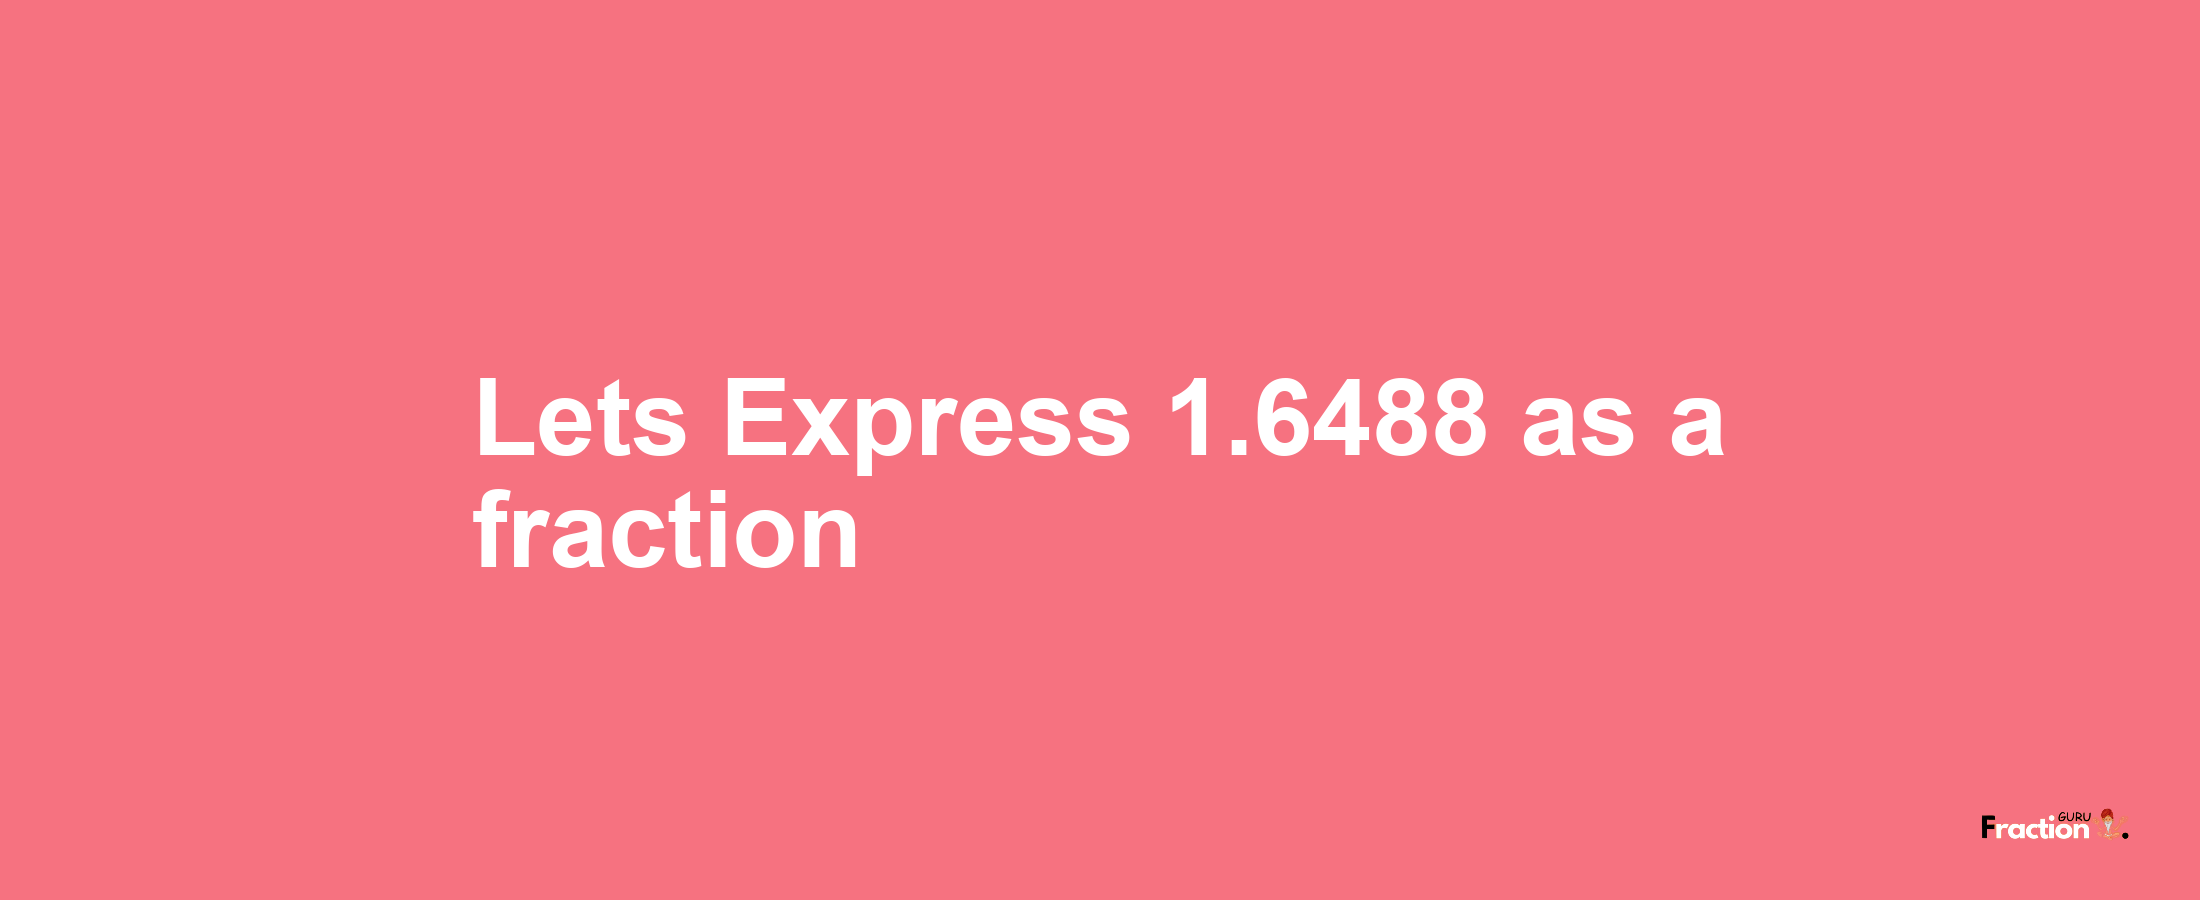 Lets Express 1.6488 as afraction